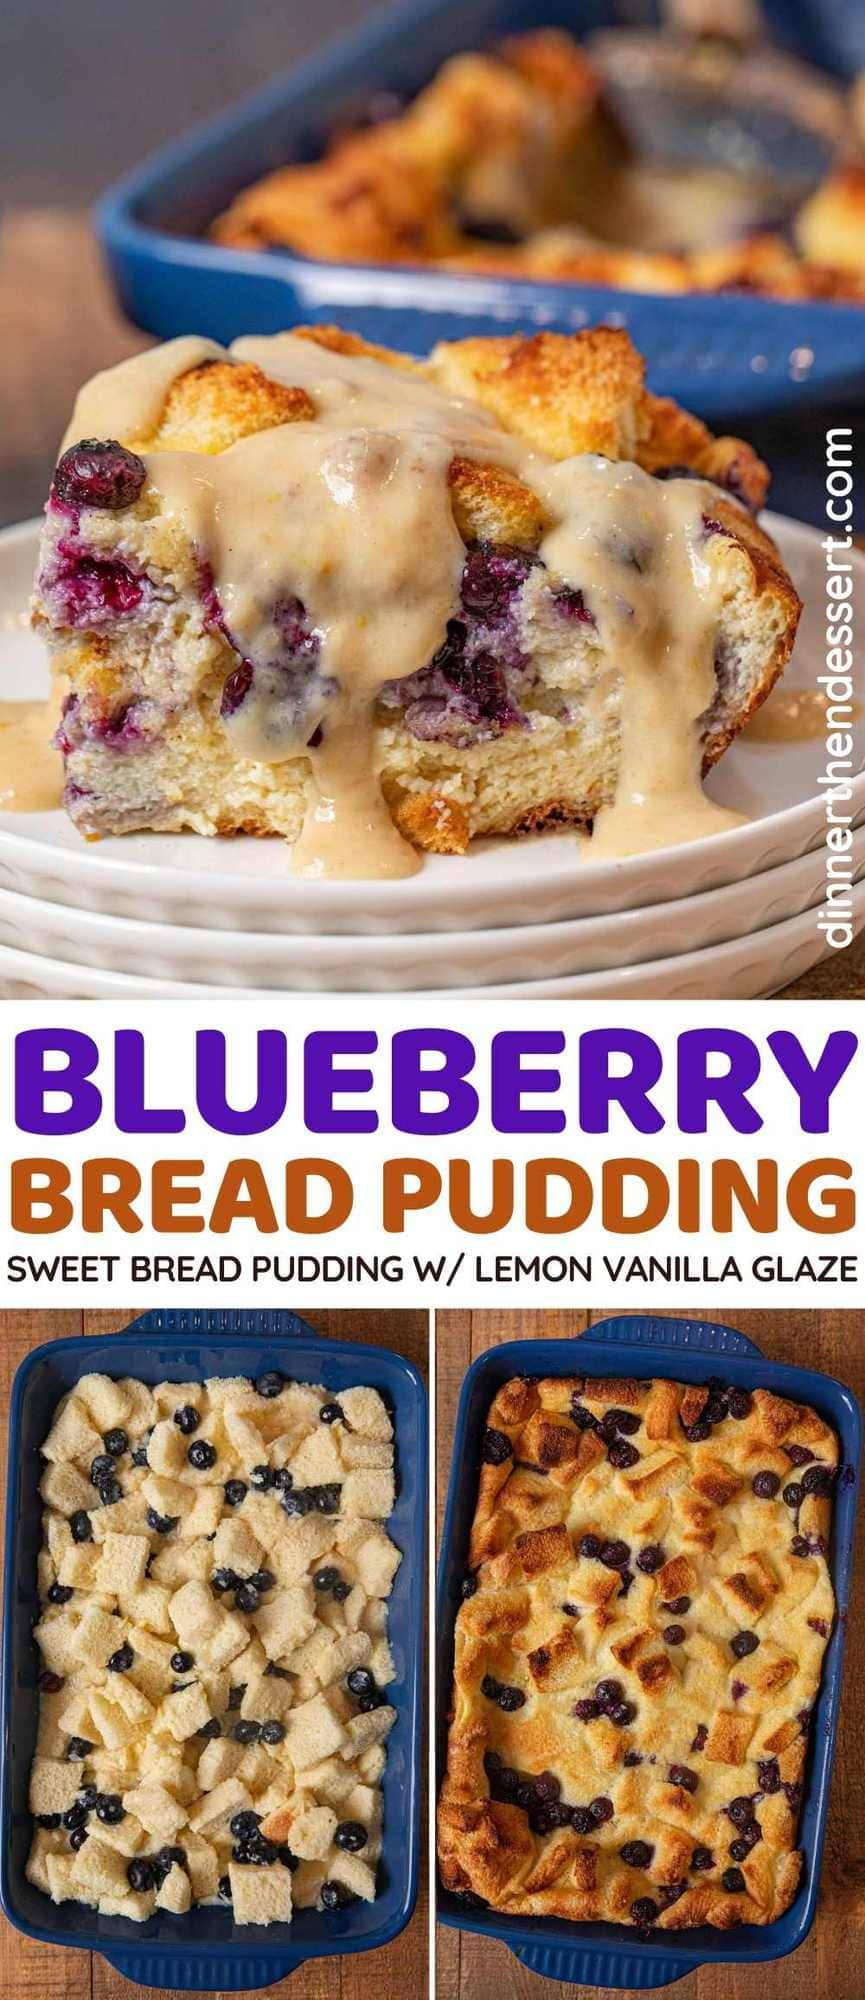 Blueberry Bread Pudding collage